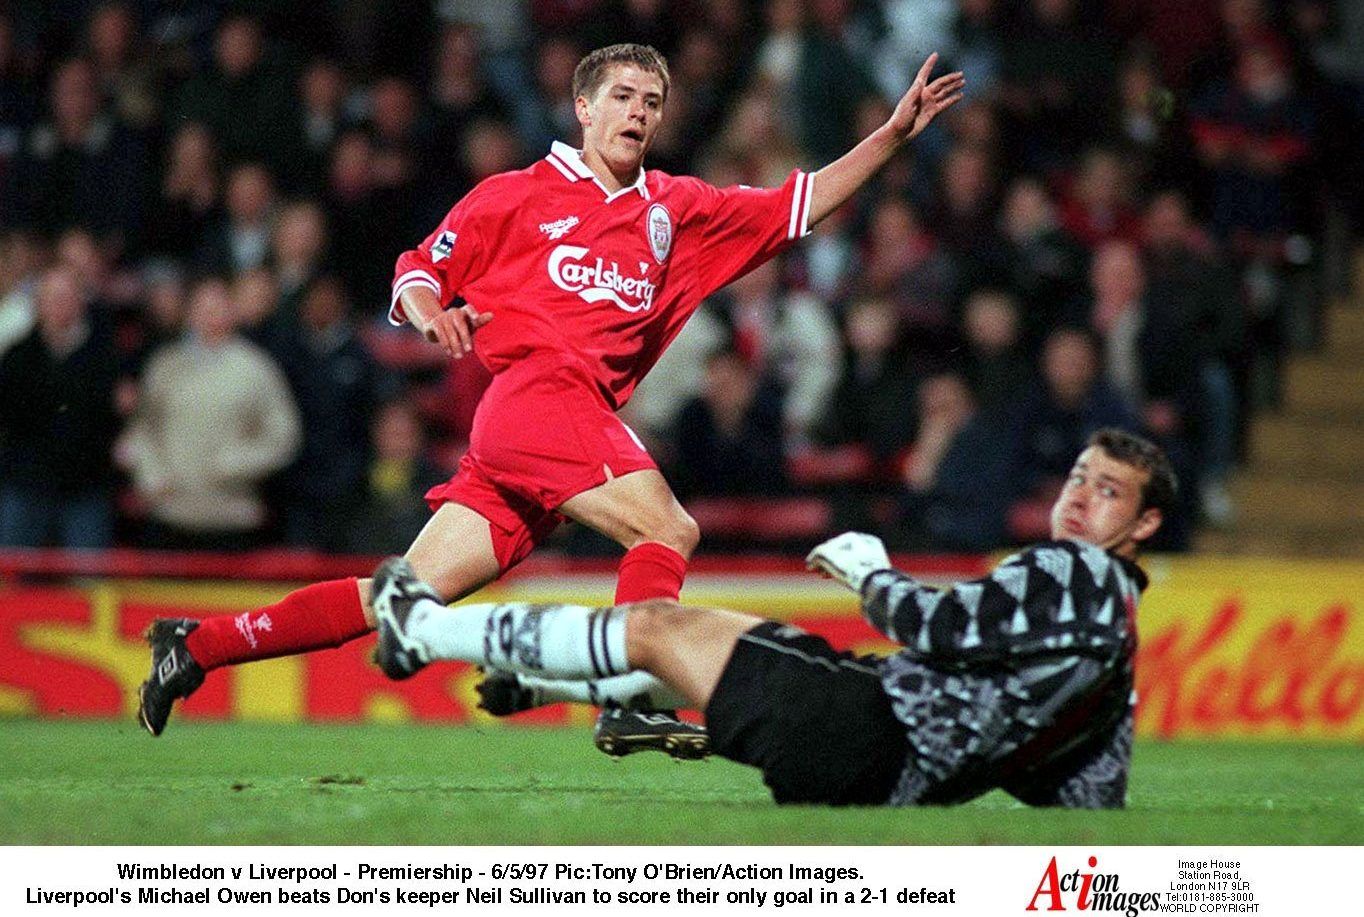 Wimbledon v Liverpool - Premiership - 6/5/97 Pic:Tony O'Brien/Action Images. 
Liverpool's Michael Owen beats Don's keeper Neil Sullivan to score their only goal in a 2-1 defeat